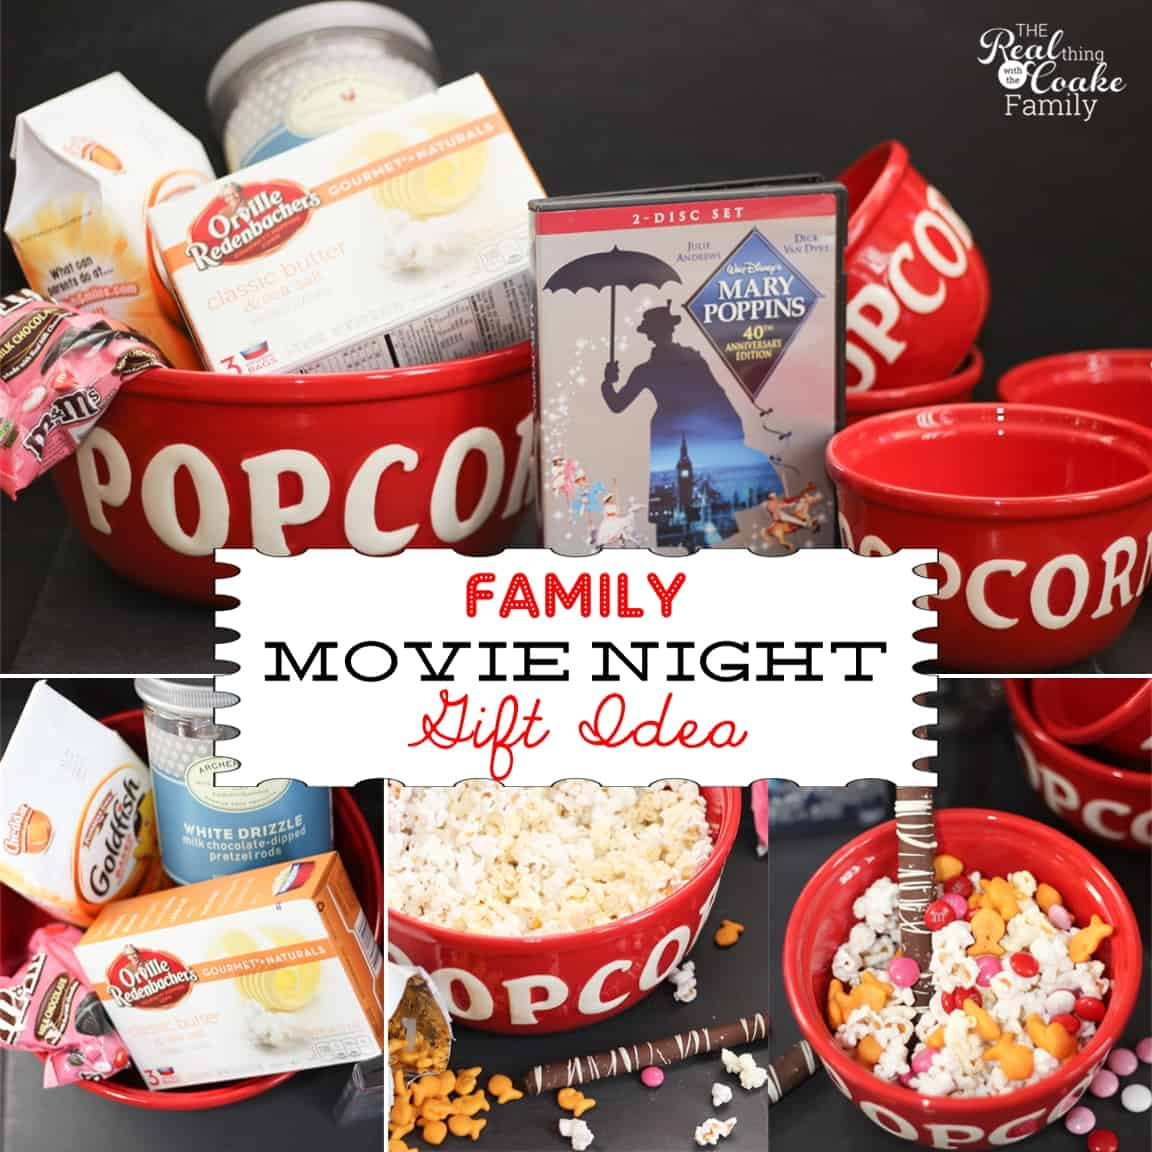 Holiday Gift Ideas For Families
 Family Gift Ideas Movie Night in a box or basket